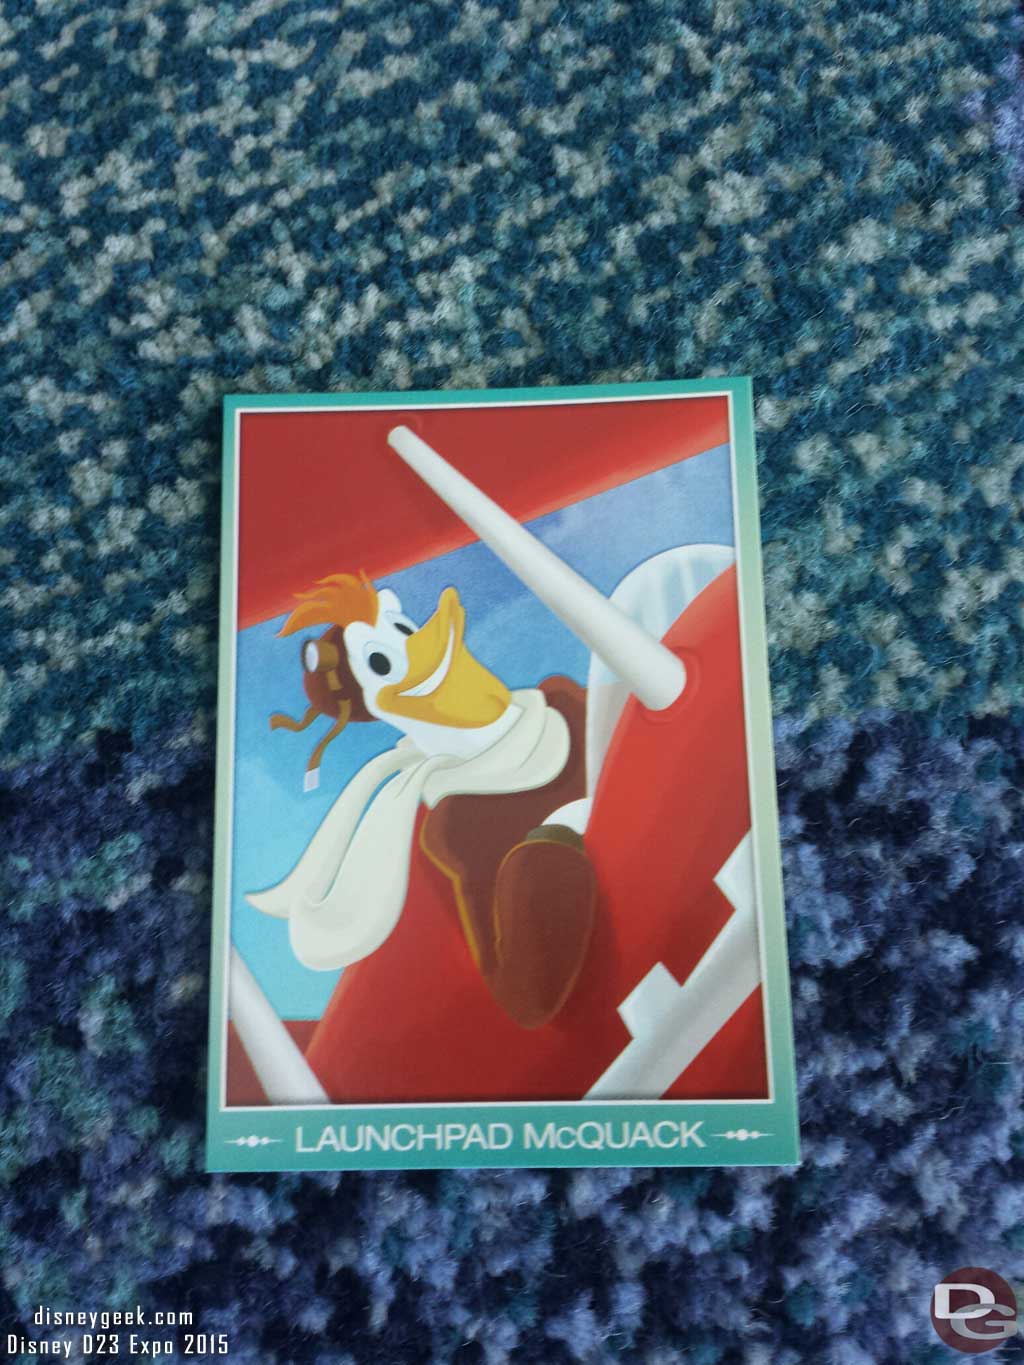 A trading card alert went out. This time for Launchpad